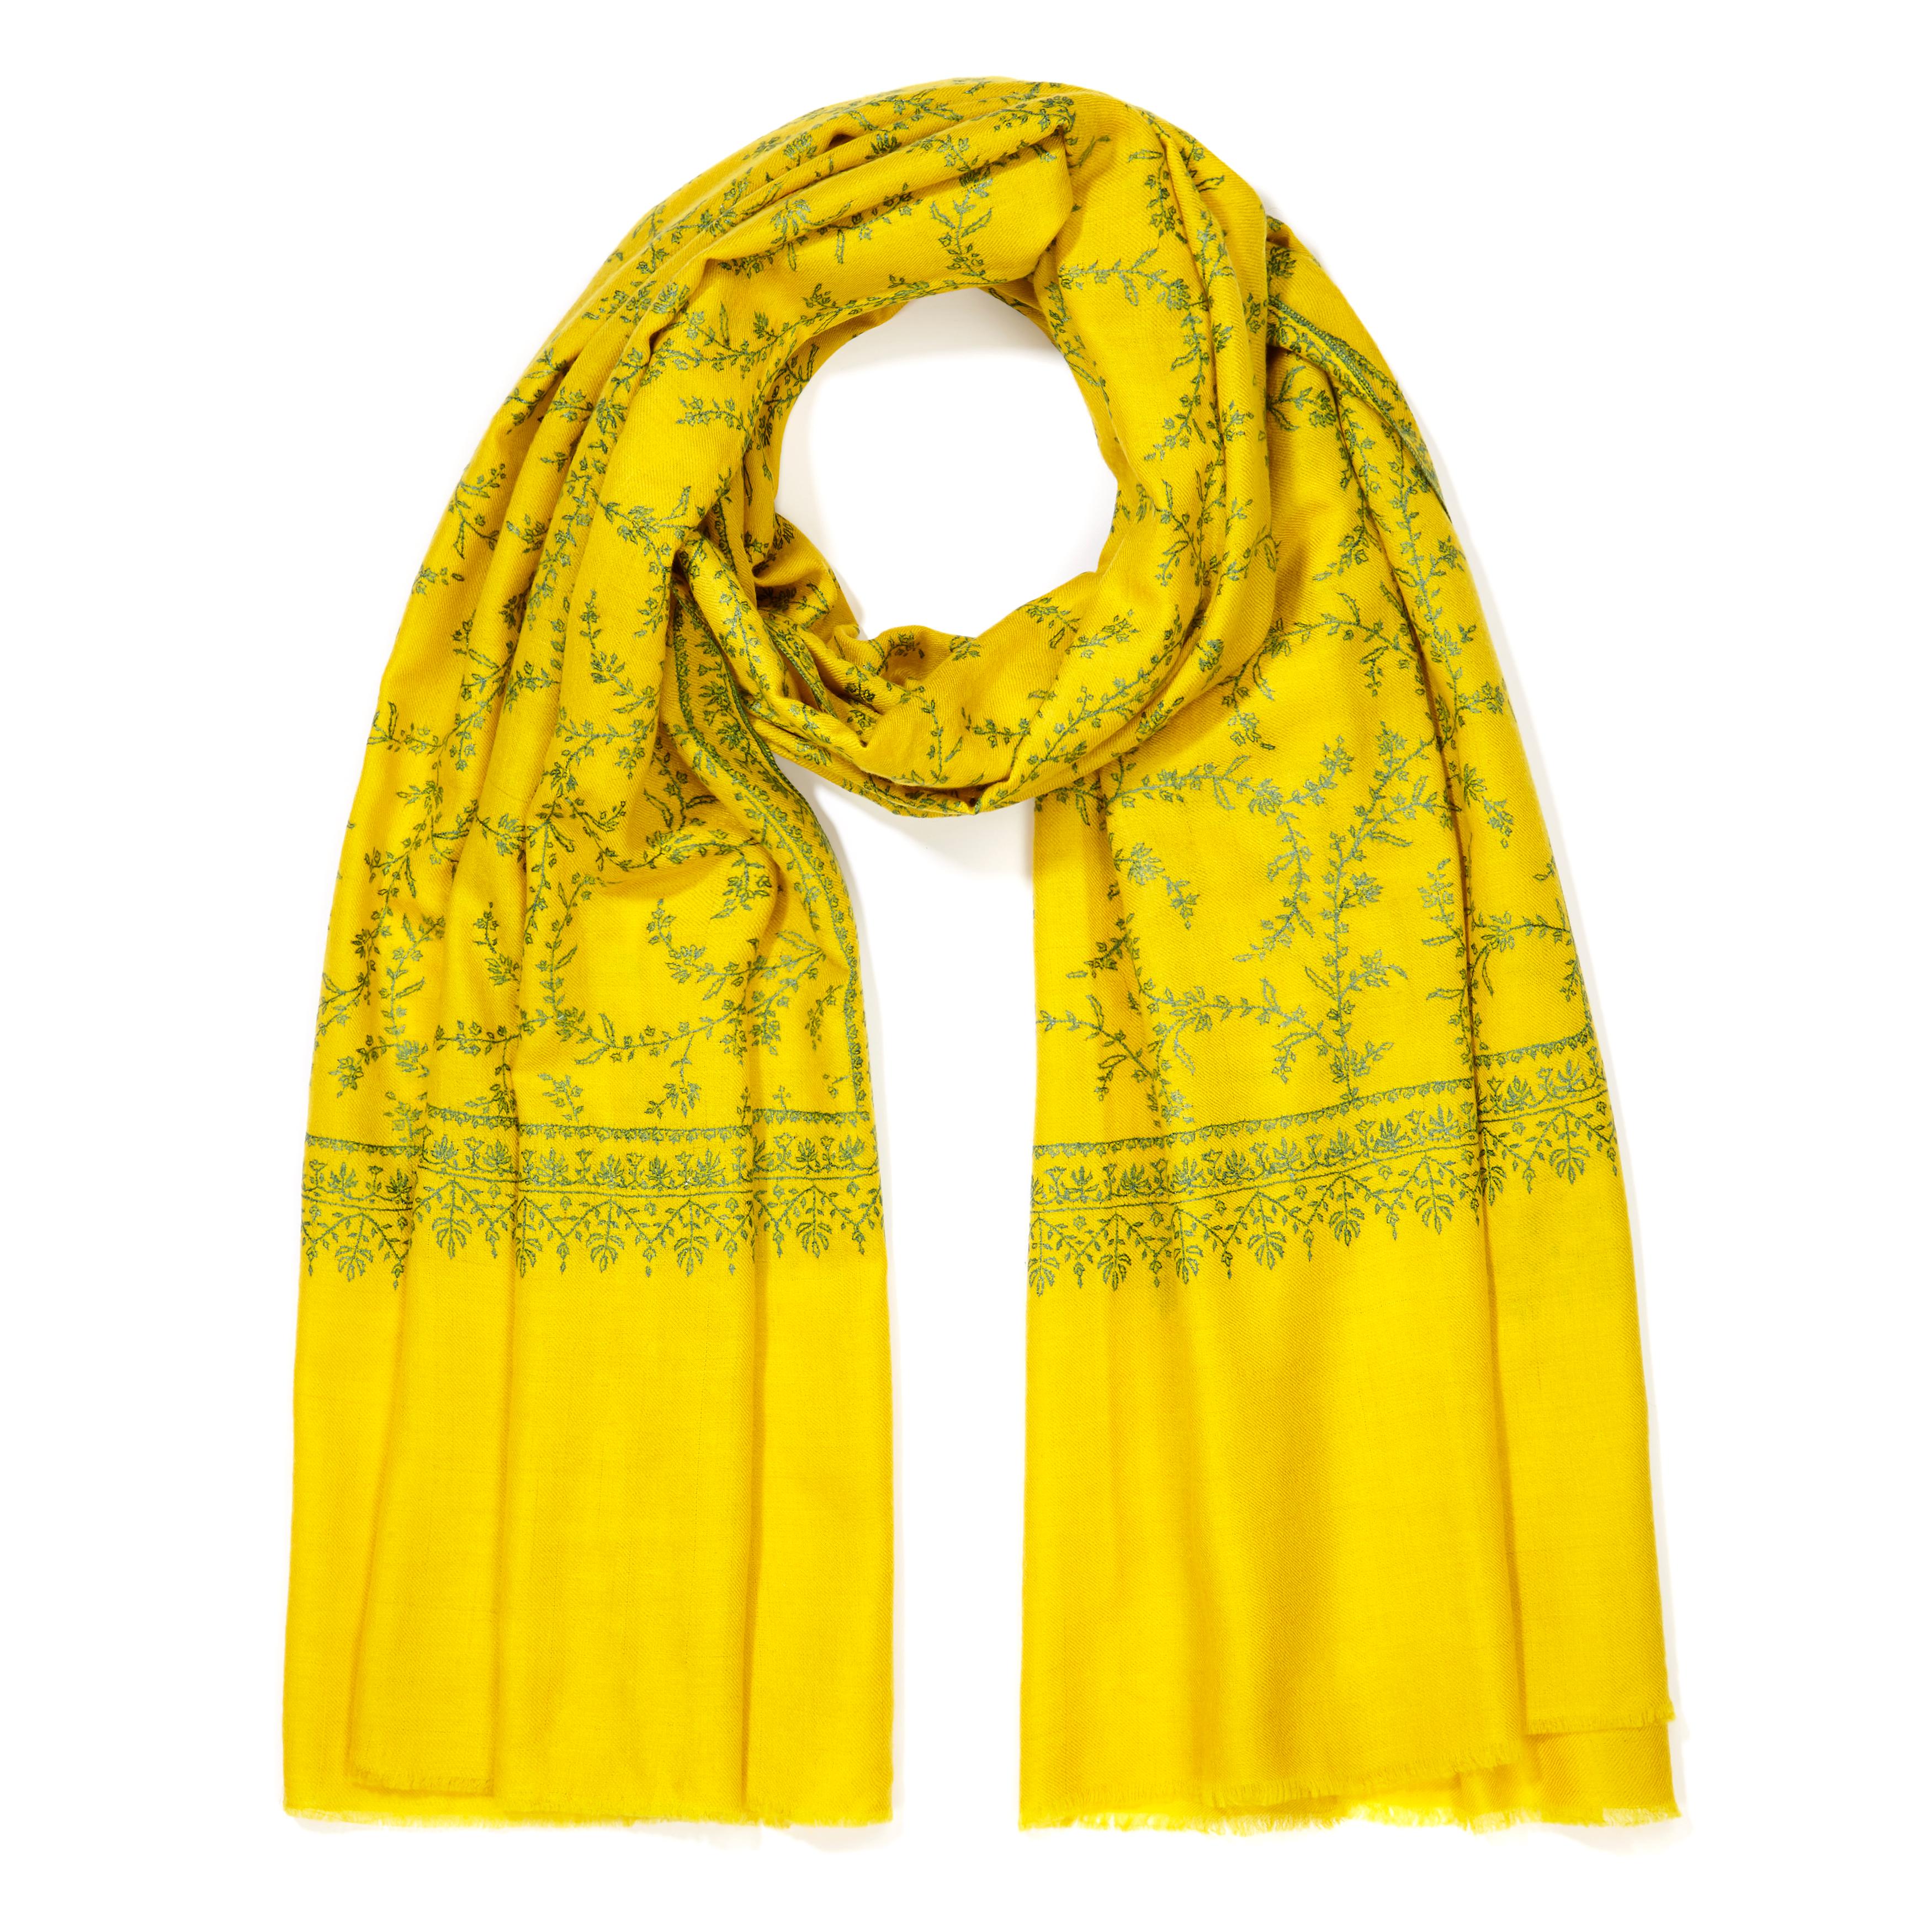 Women's or Men's Hand Embroidered 100% Cashmere Scarf in Yellow Handmade in Kashmir India 